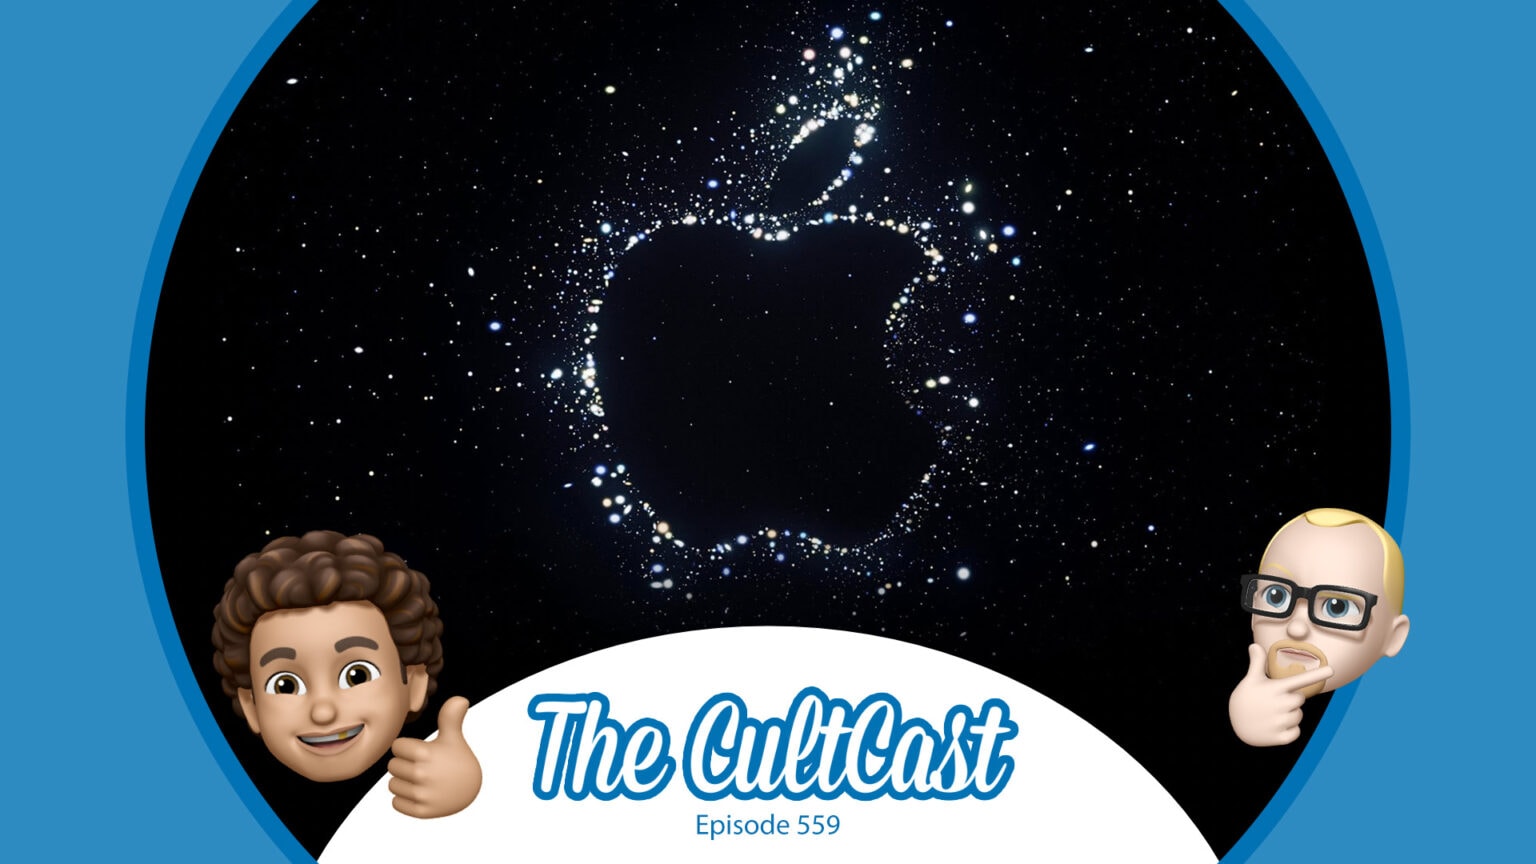 The CultCast podast: Are we going to get a big bang out of Apple's September 7 event?